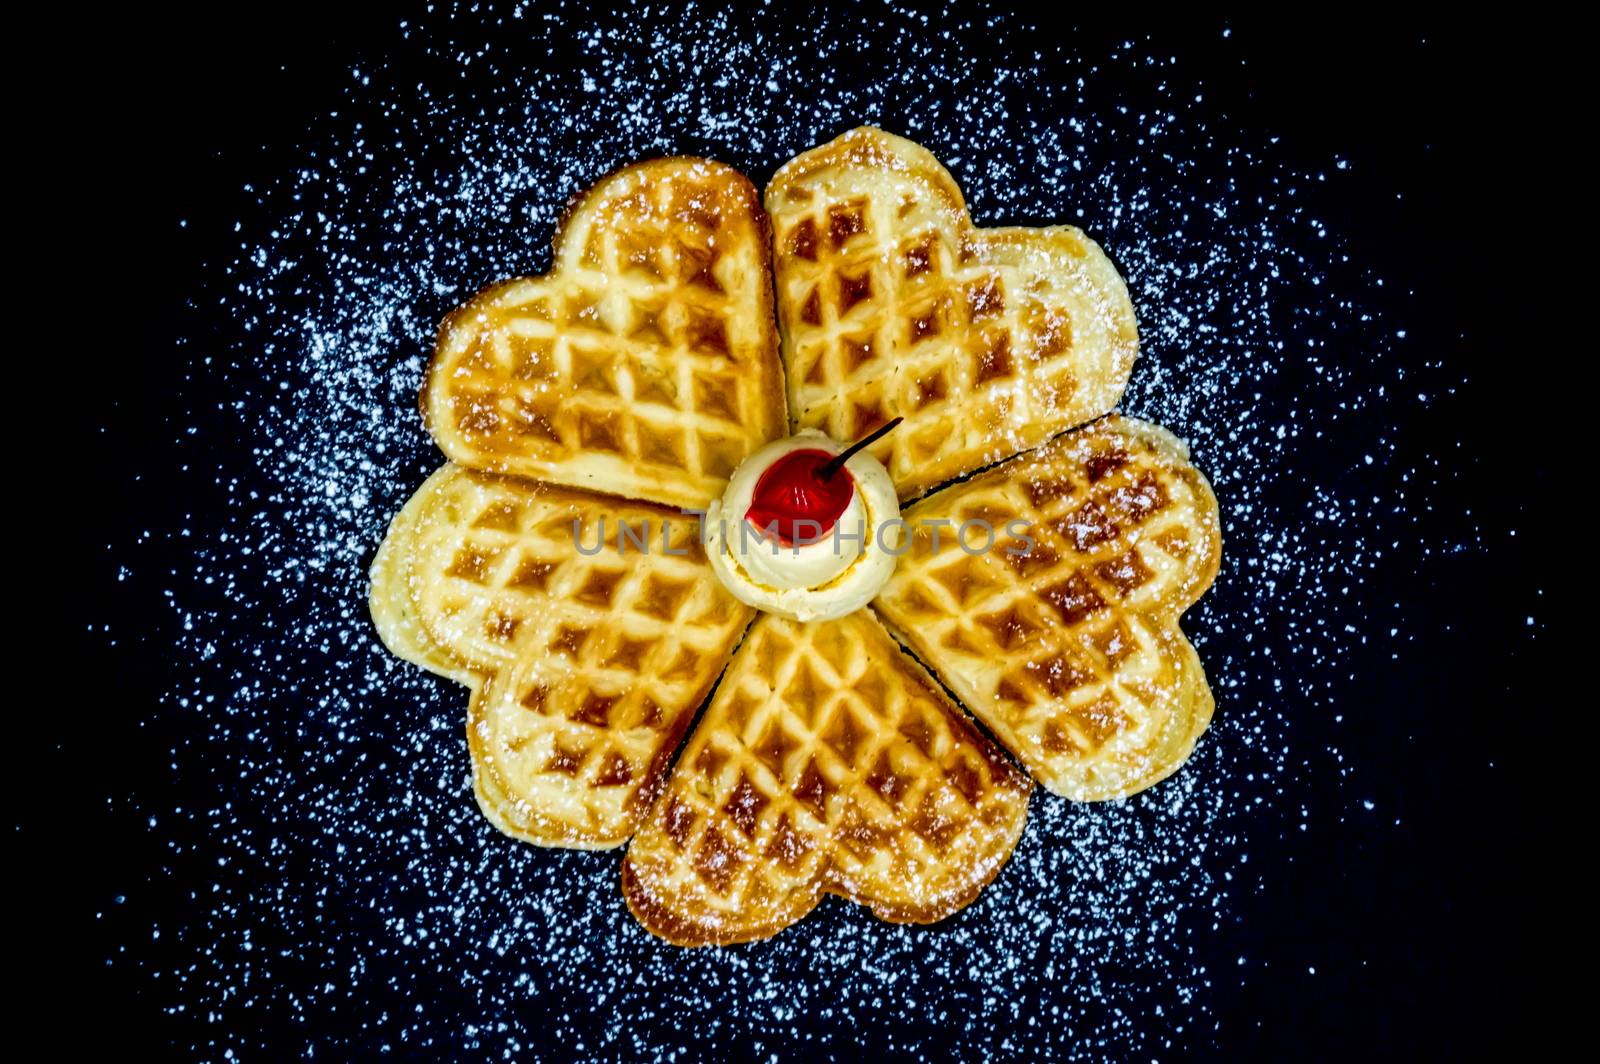 Homemade waffles with powdered sugar, a scoop of vanilla ice cream and a cherry on a black background, isolated image of food.